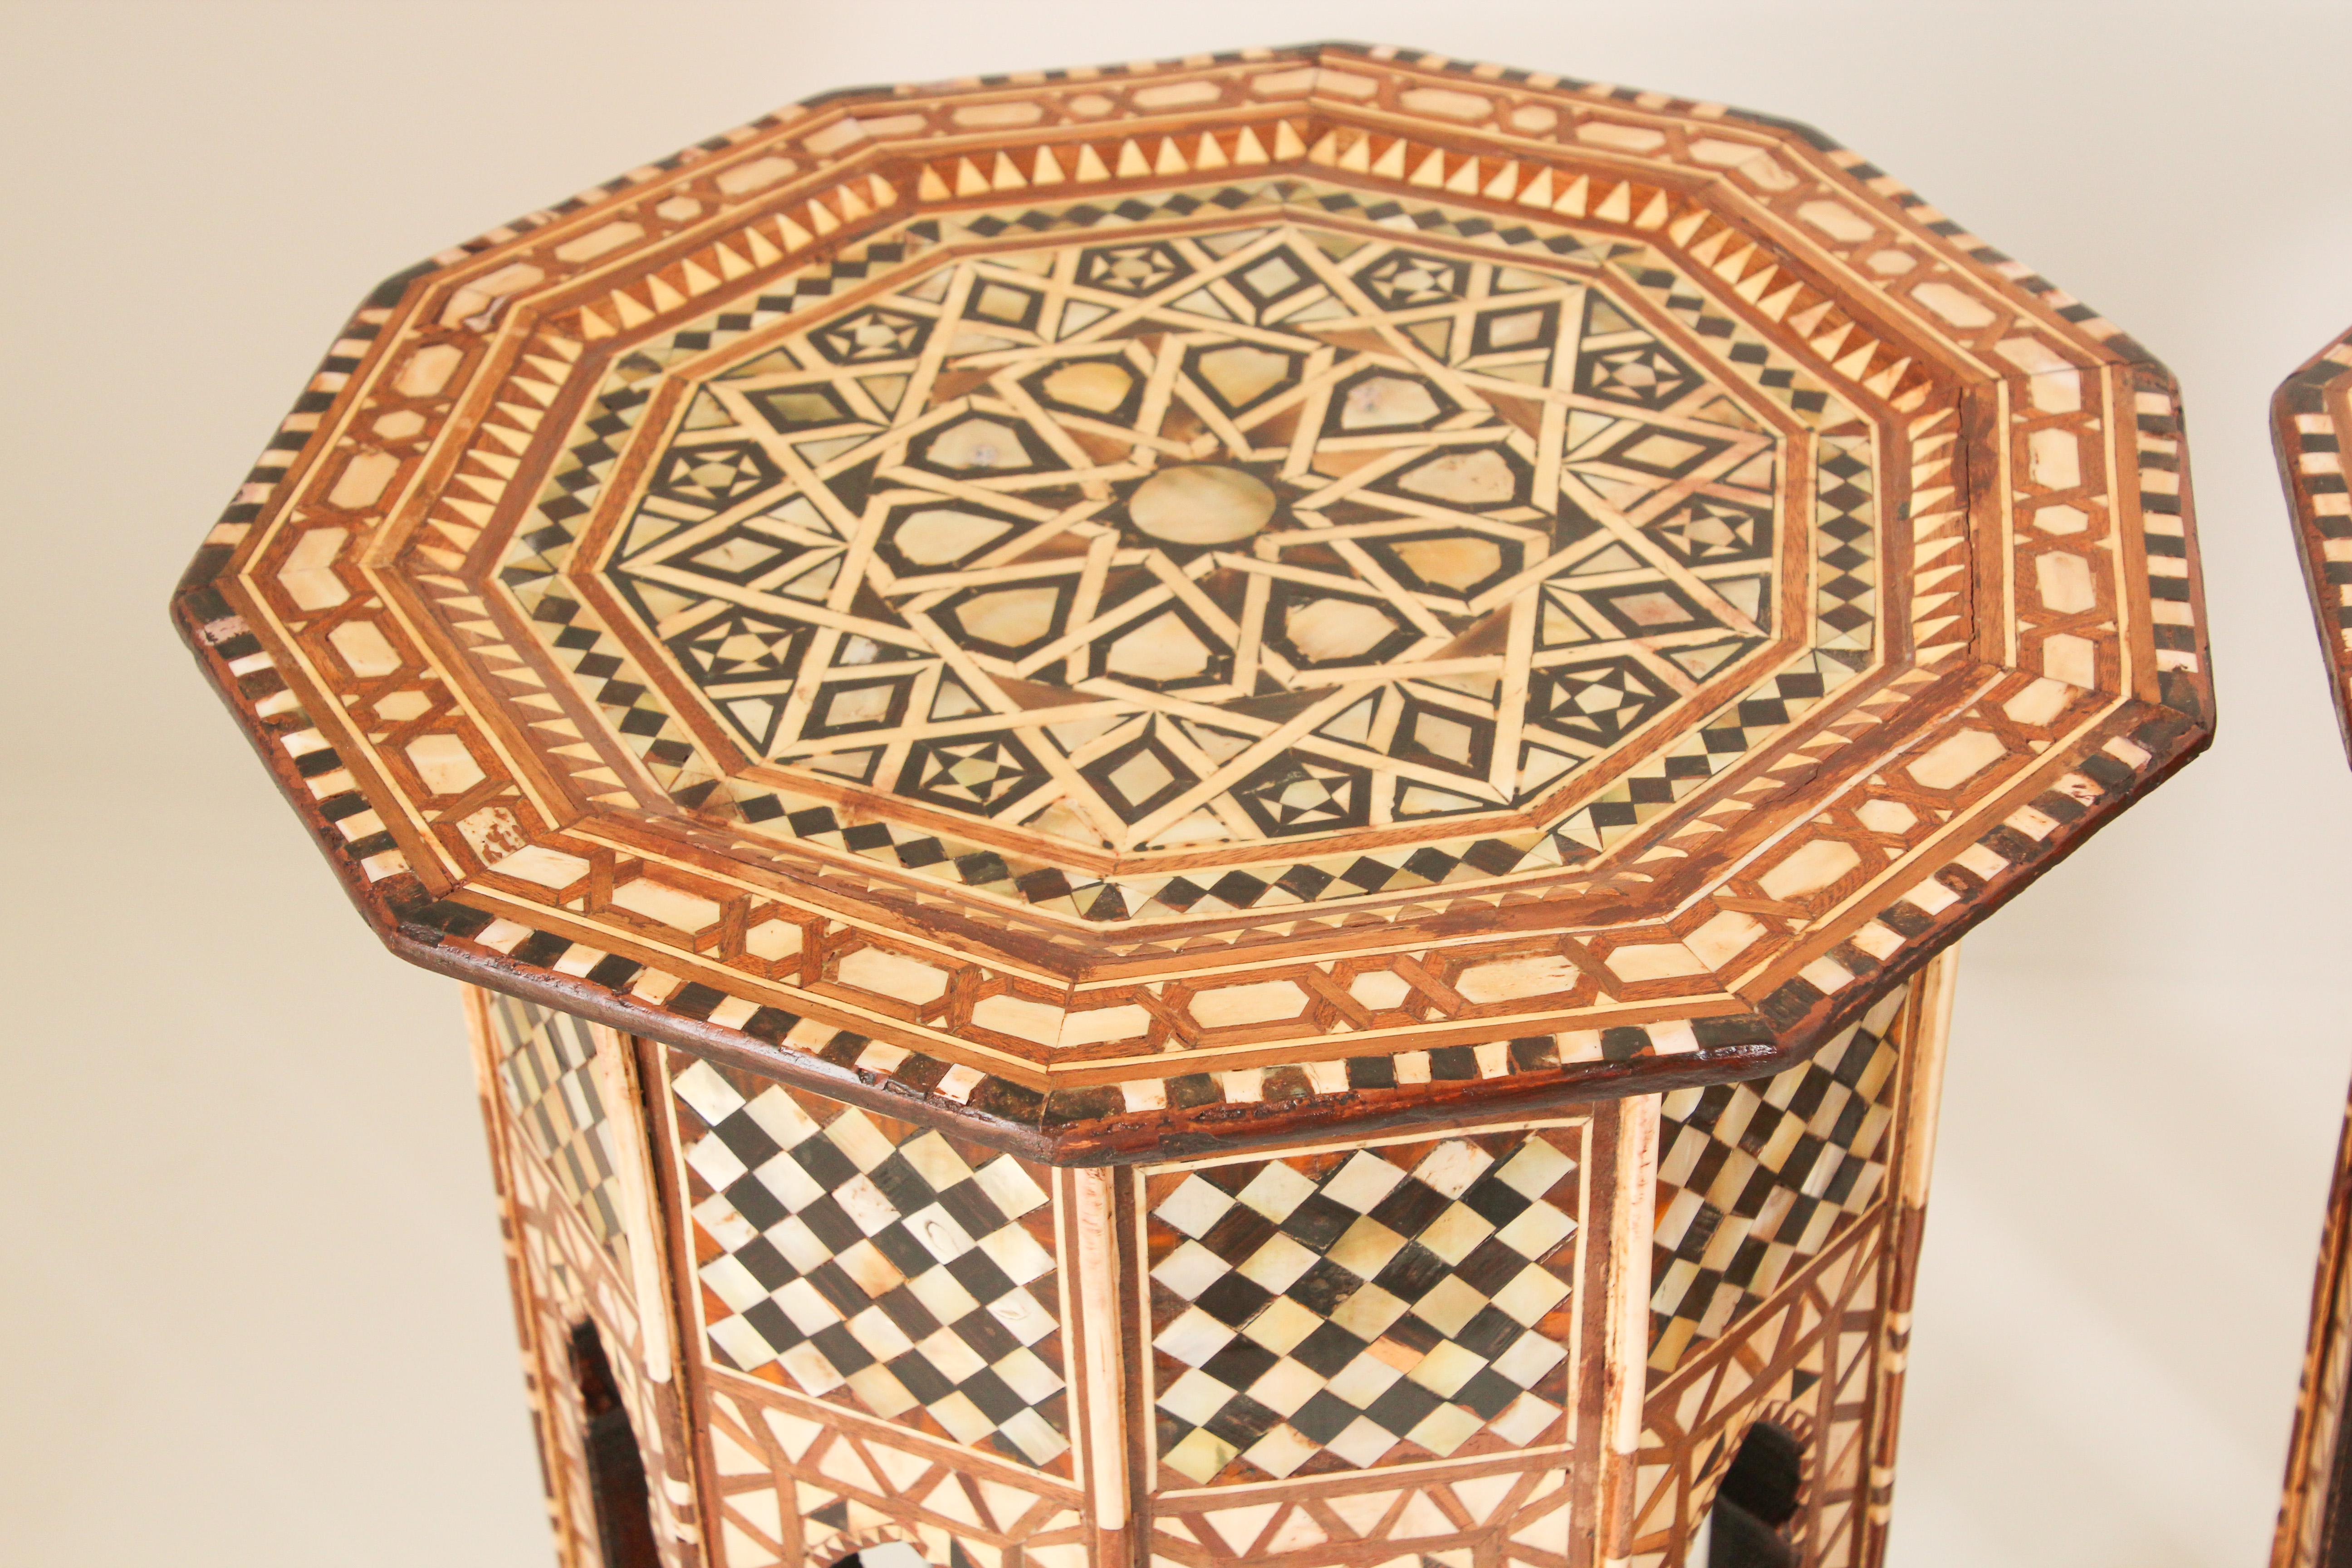 Middle East Syrian Octagonal Tables Inlaid 1